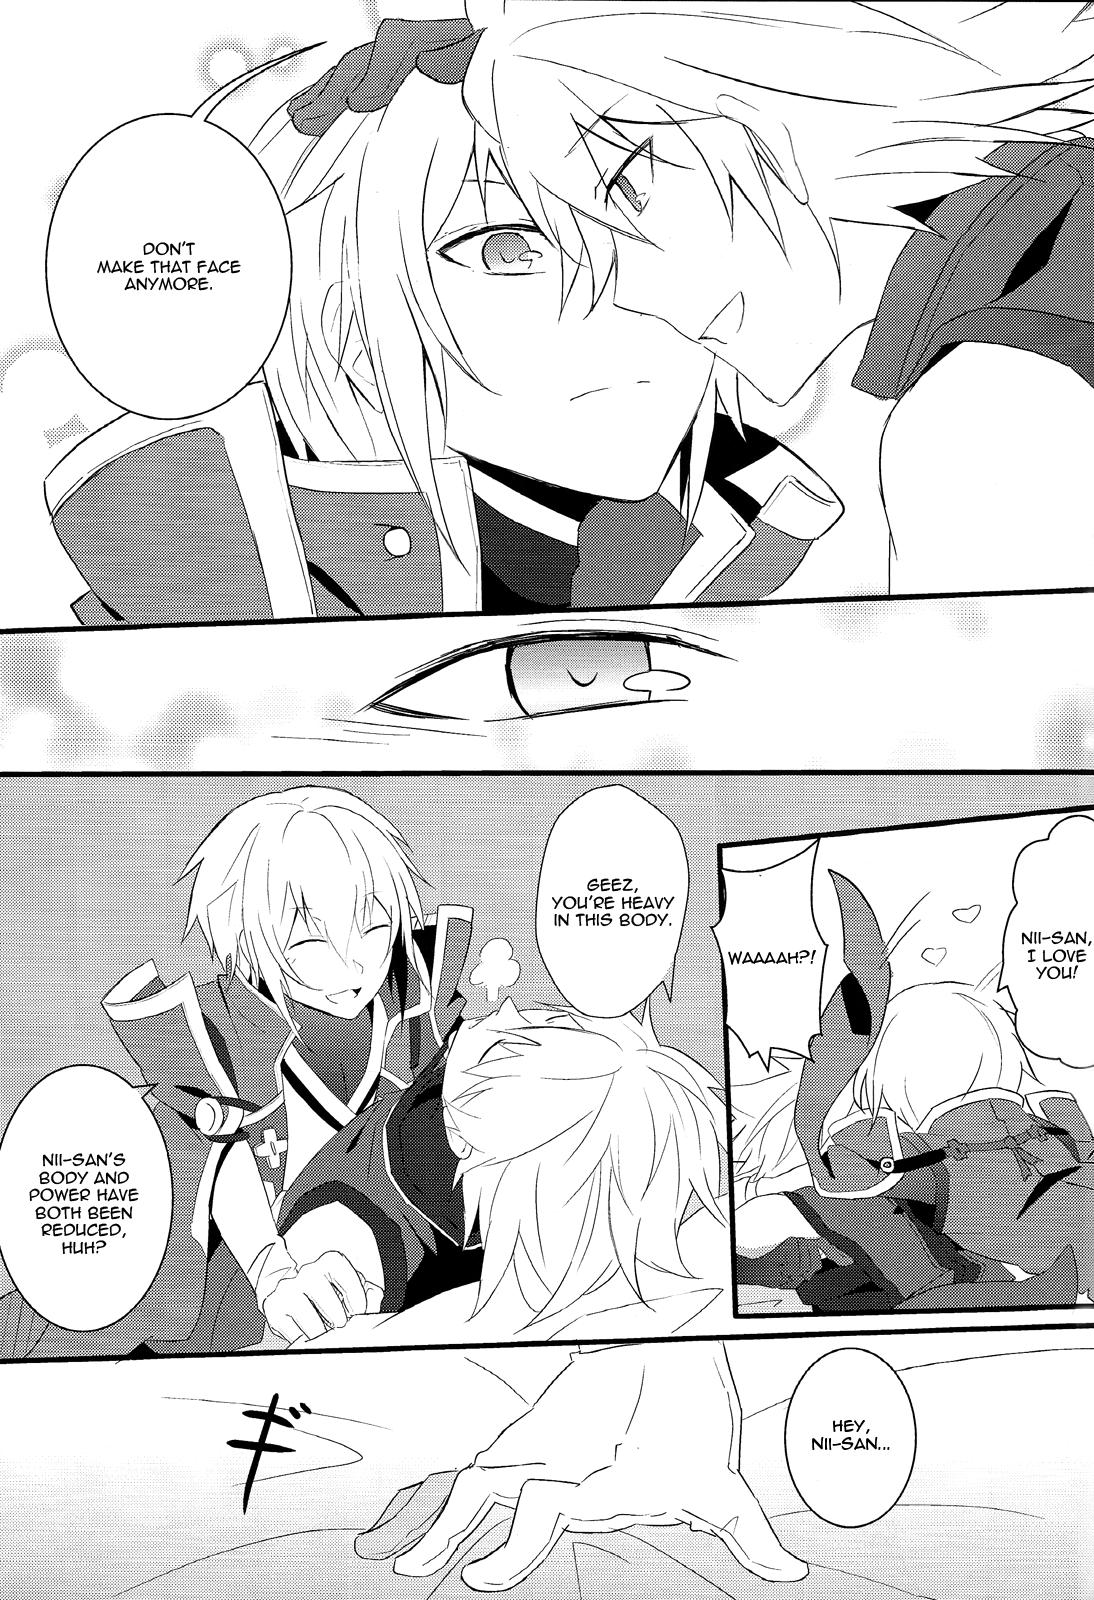 Worship Taking Back Time - Blazblue Friend - Page 10